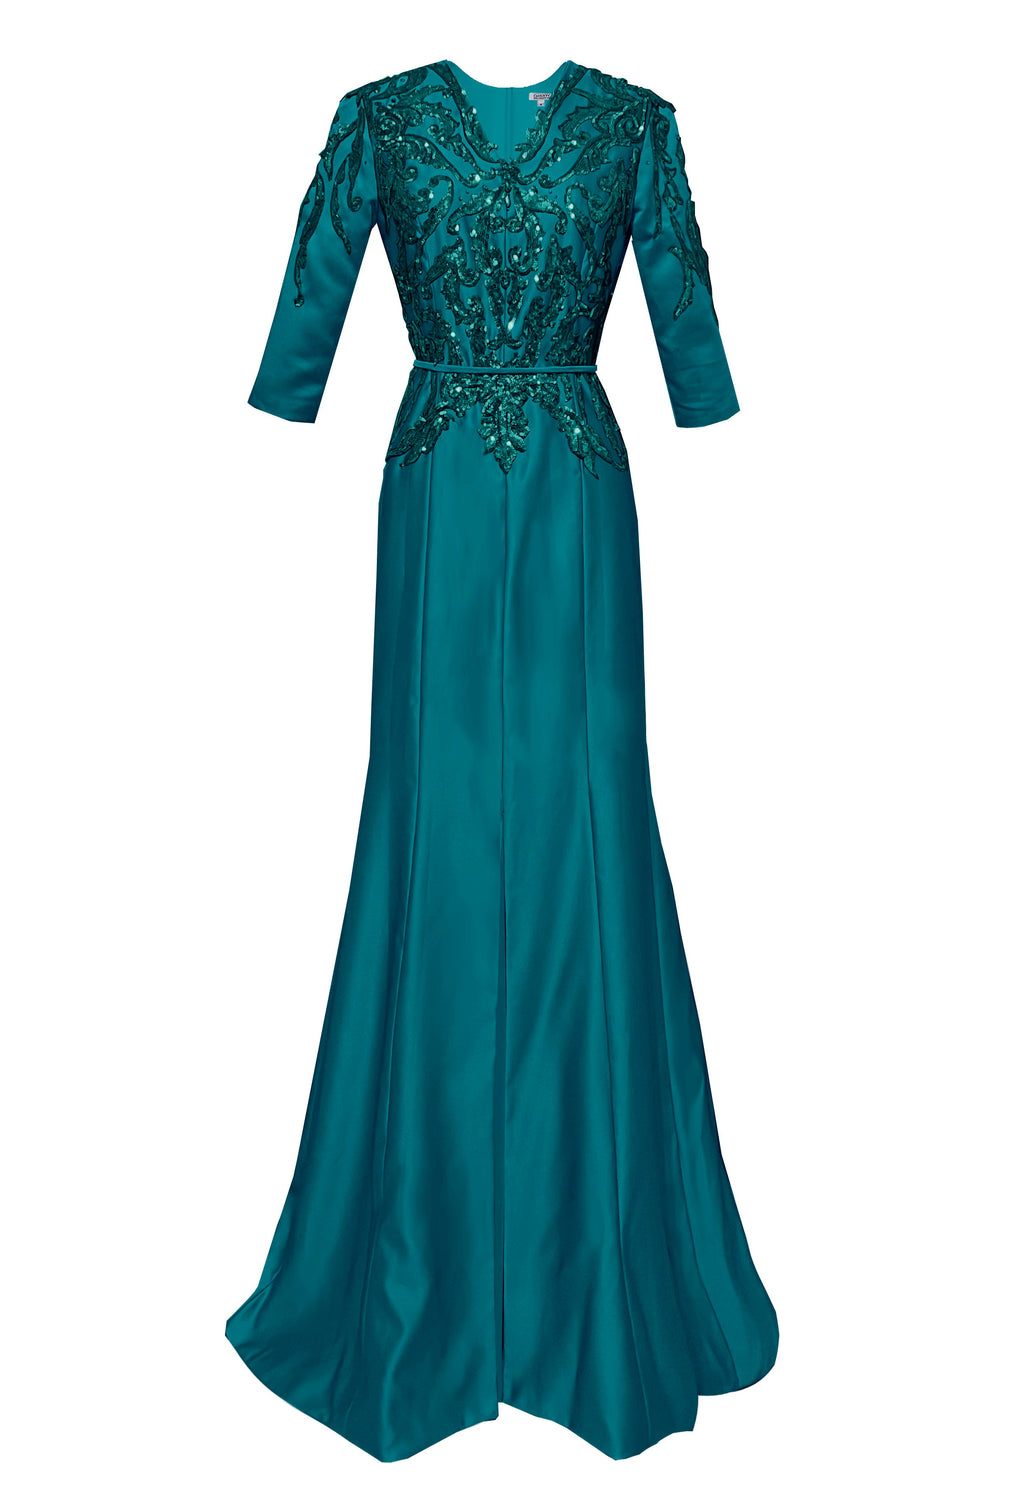 Mandalay Formal Evening Gown with Sleeves